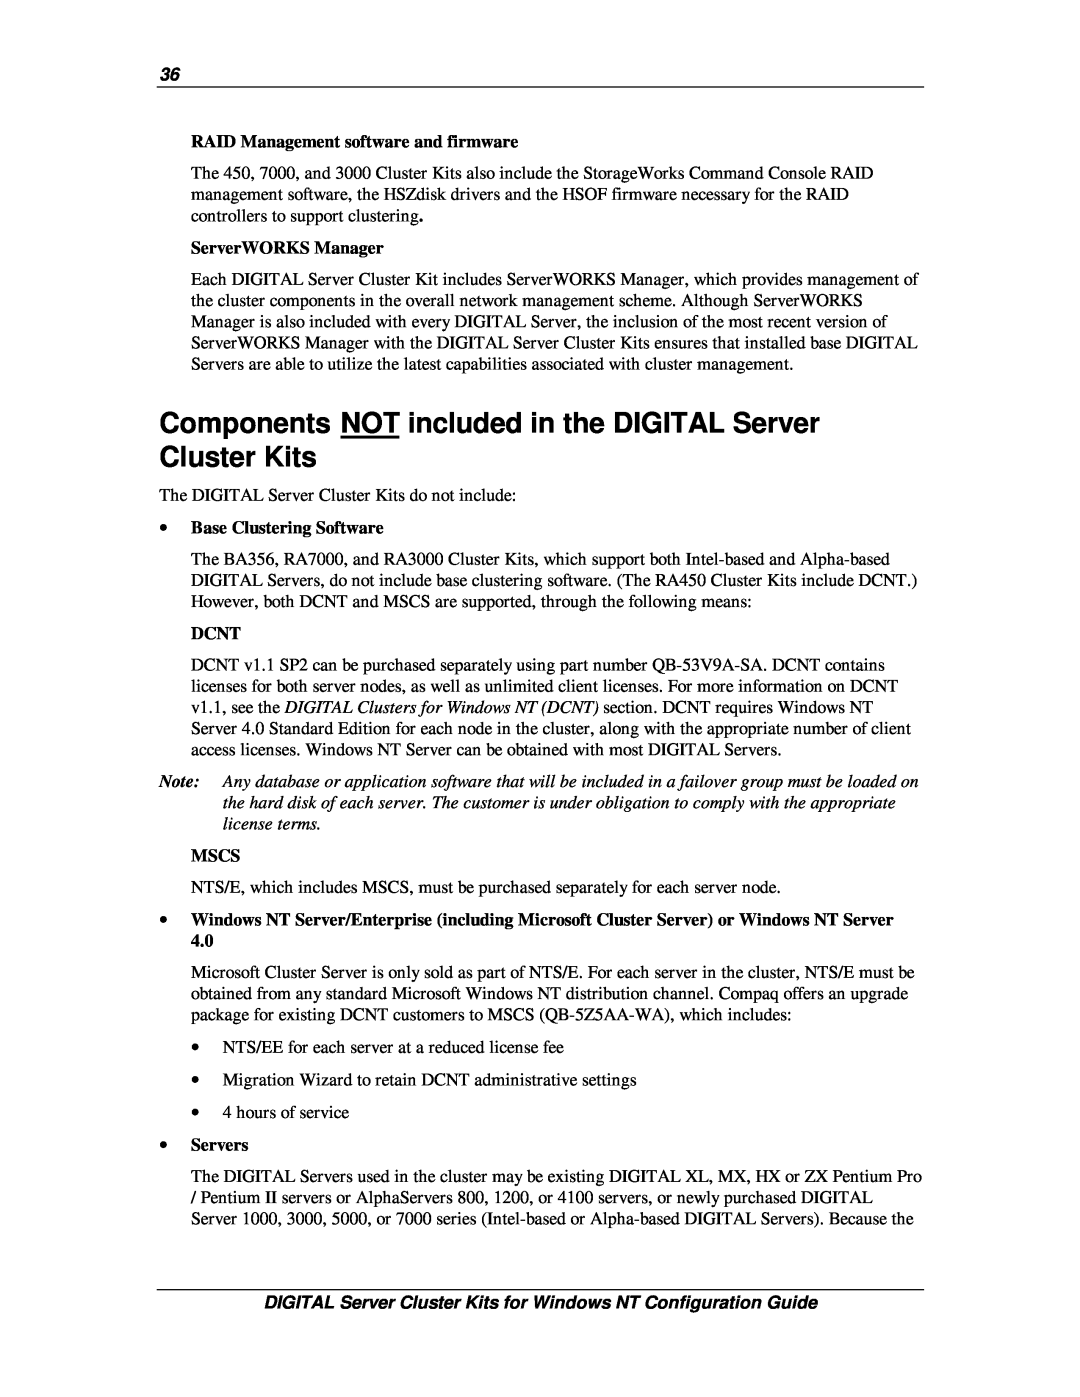 Compaq DIGITAL Server Cluster Kits for Windows NT Components NOT included in the DIGITAL Server Cluster Kits, ∙ Servers 